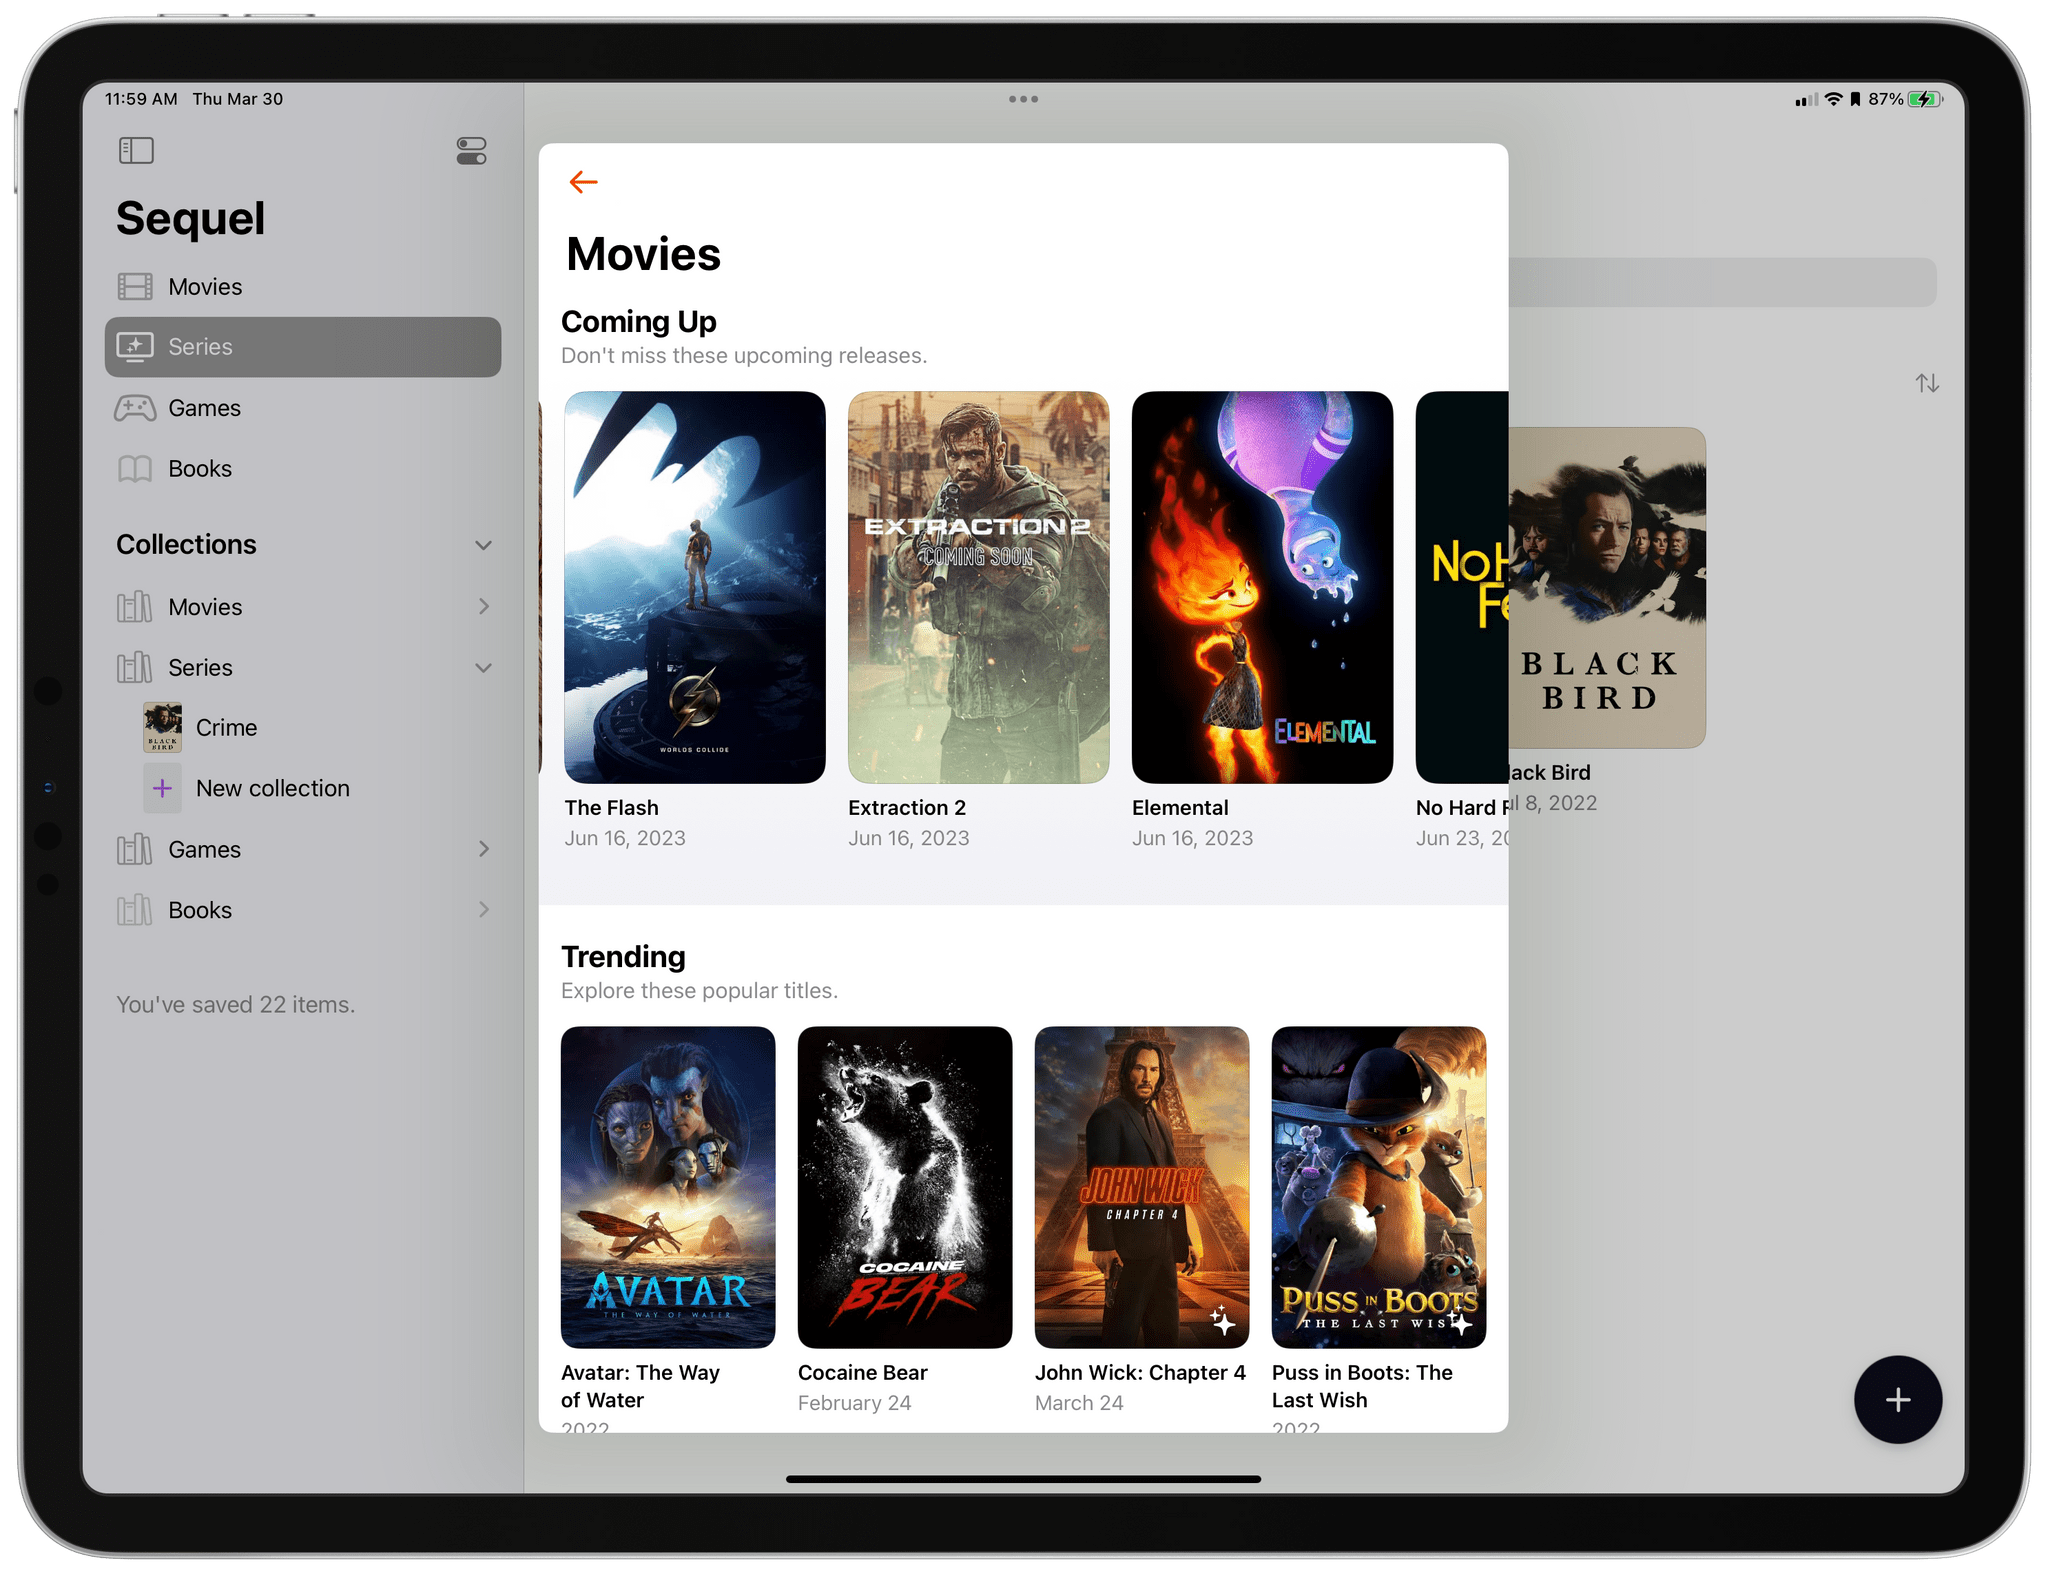 Browsing the Movies category.